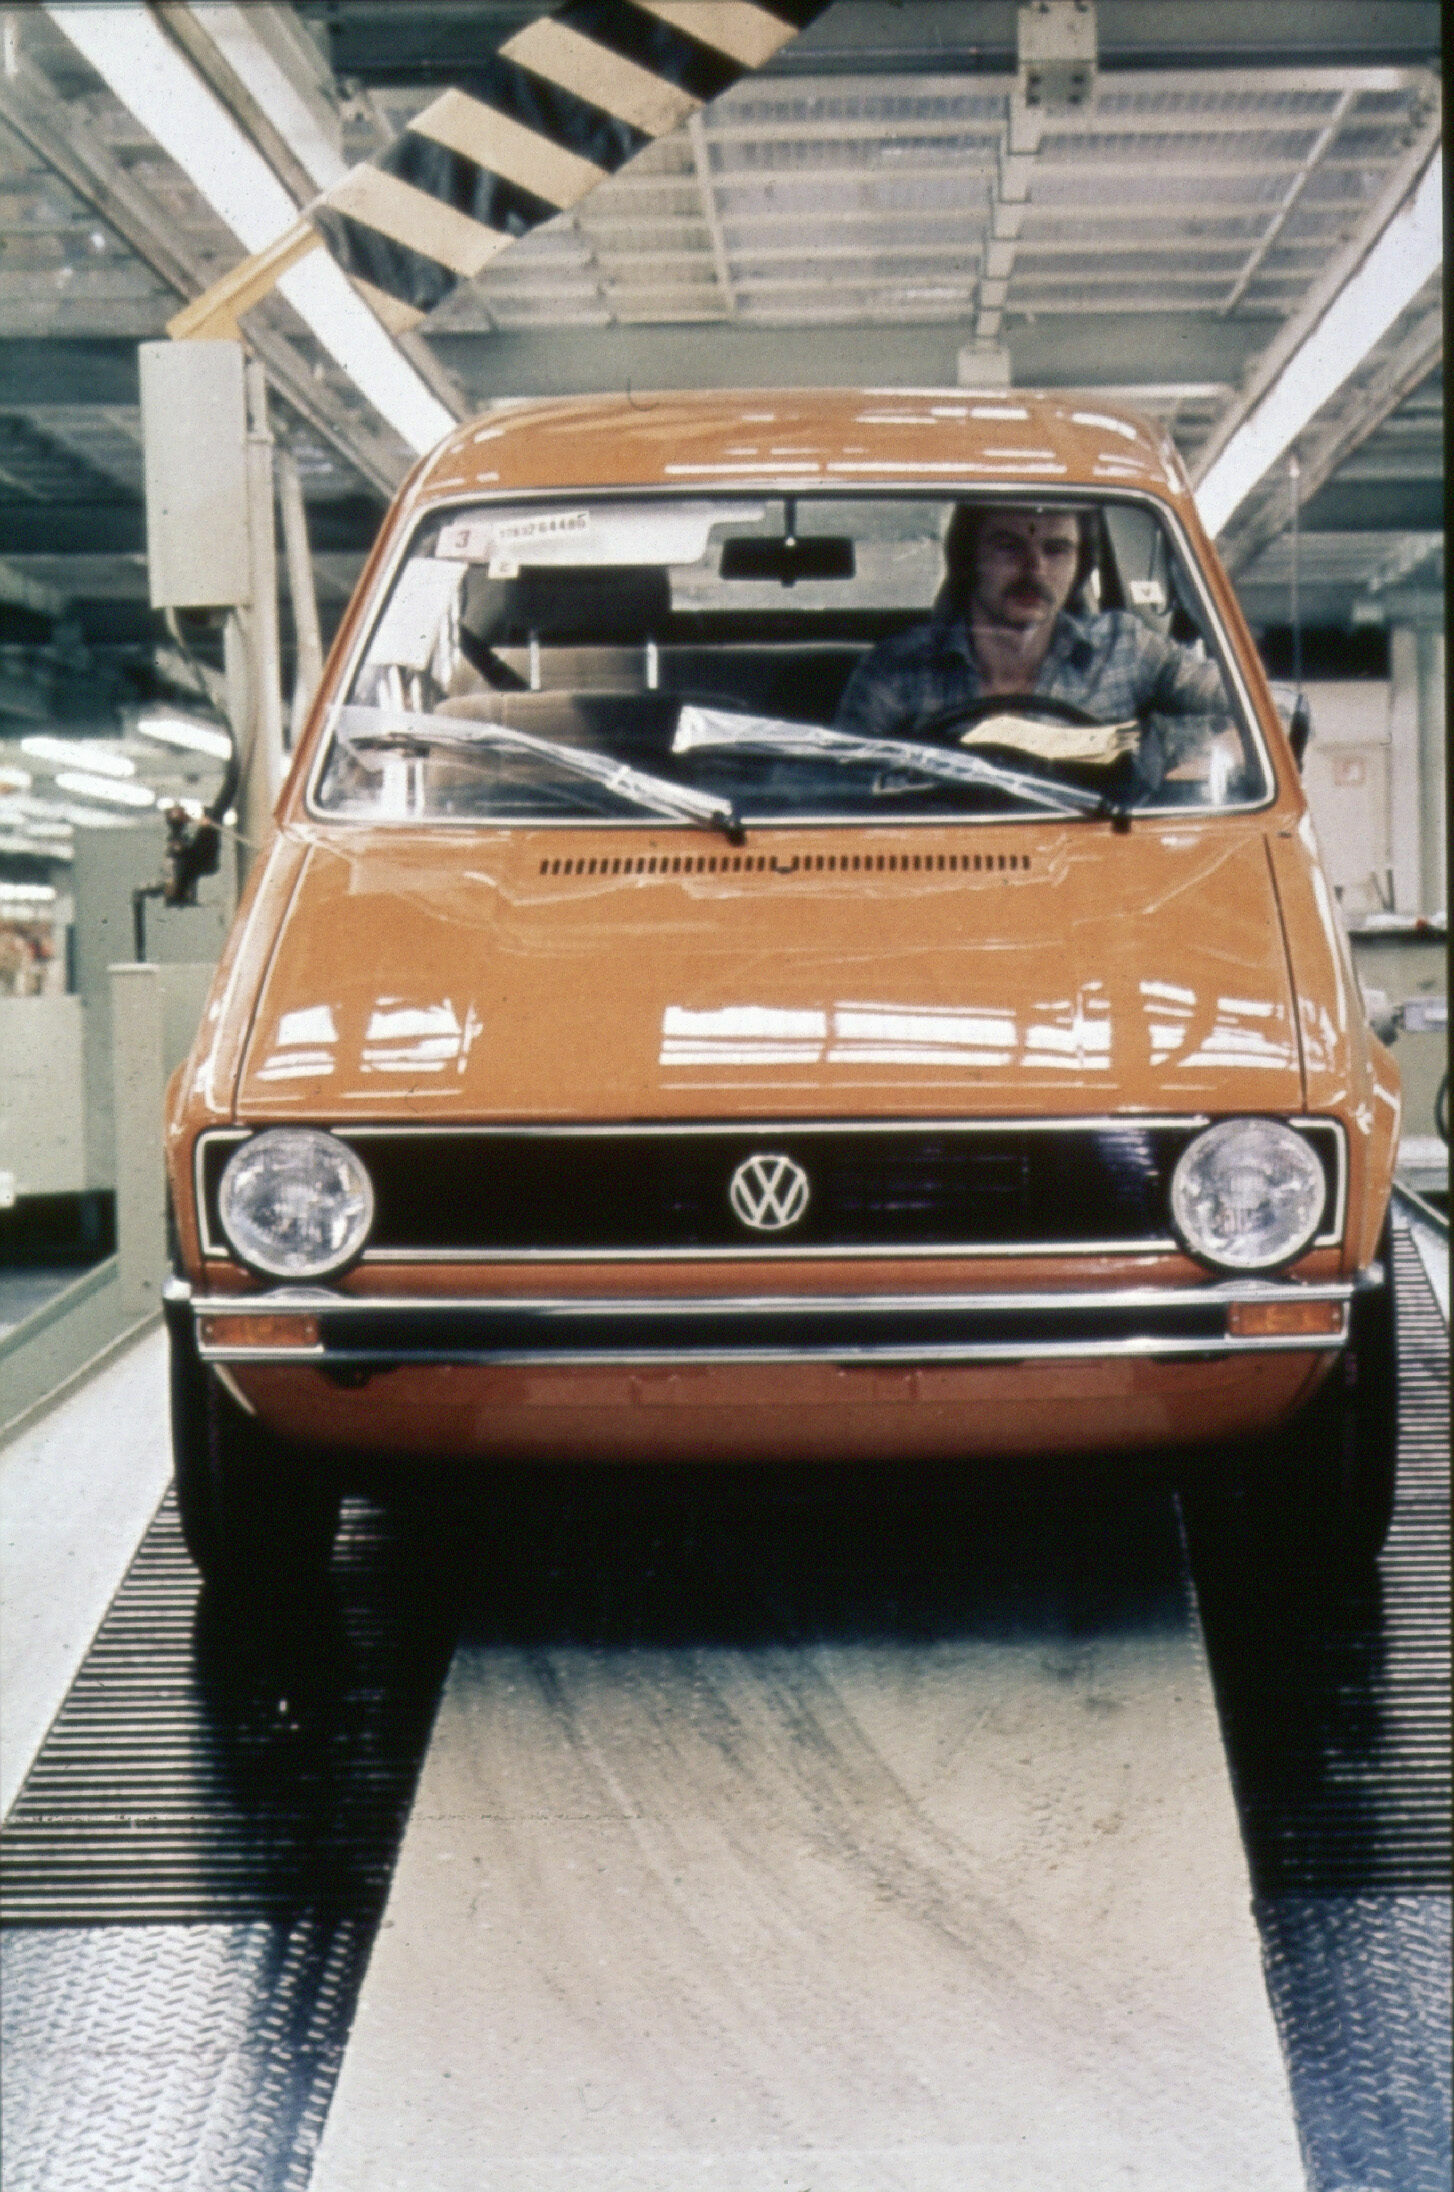 A world bestseller celebrates its 50th birthday – Volkswagen started production of the first Golf on 29 March 1974